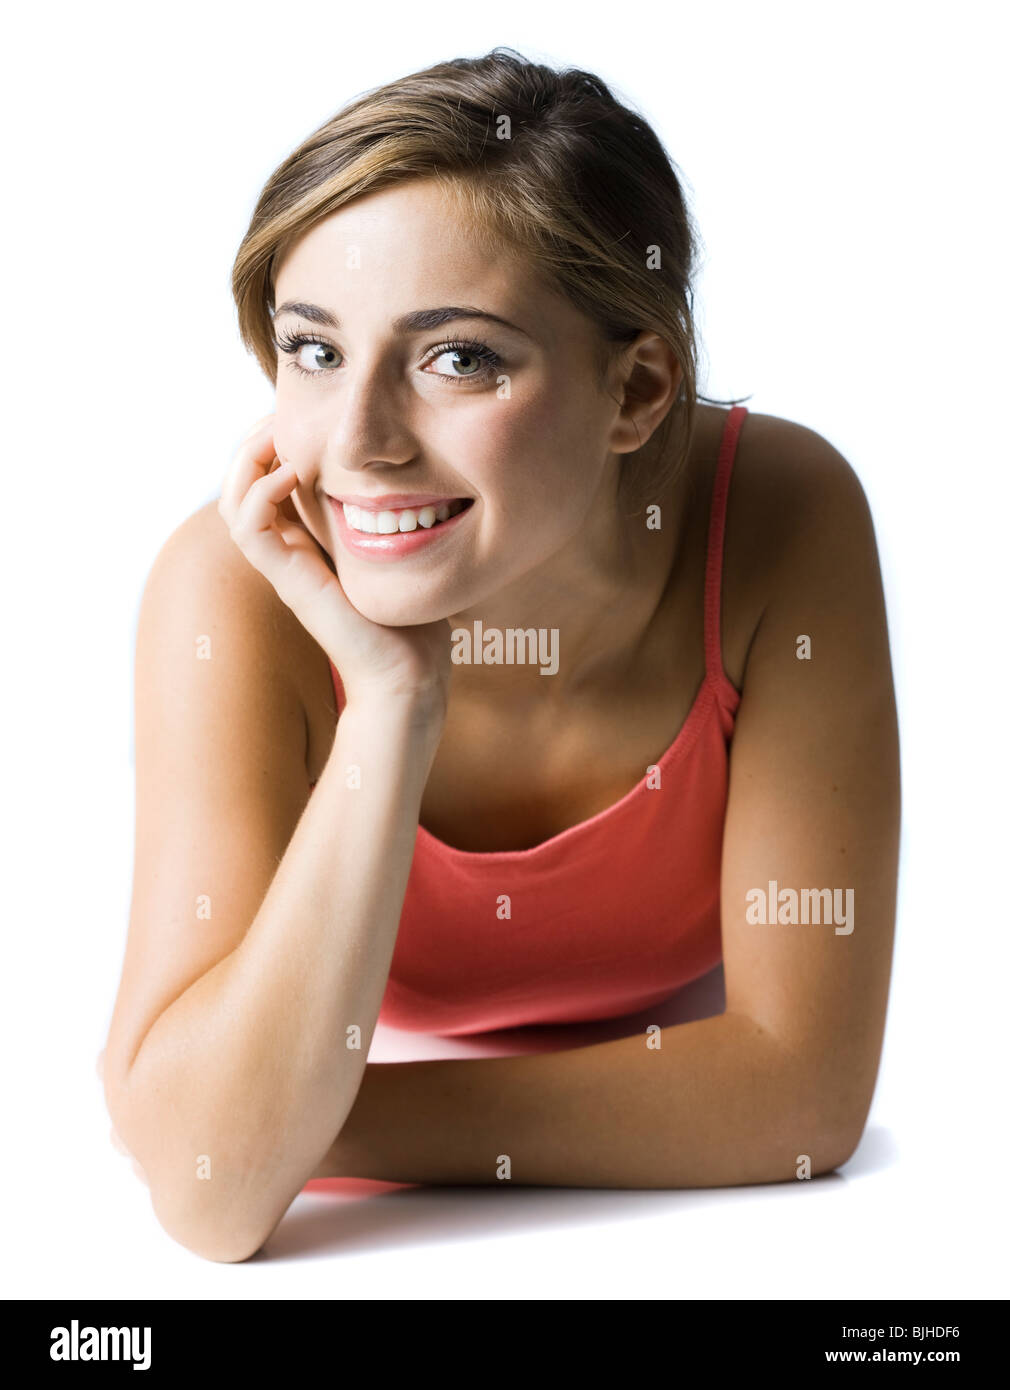 woman with brown hair Stock Photo